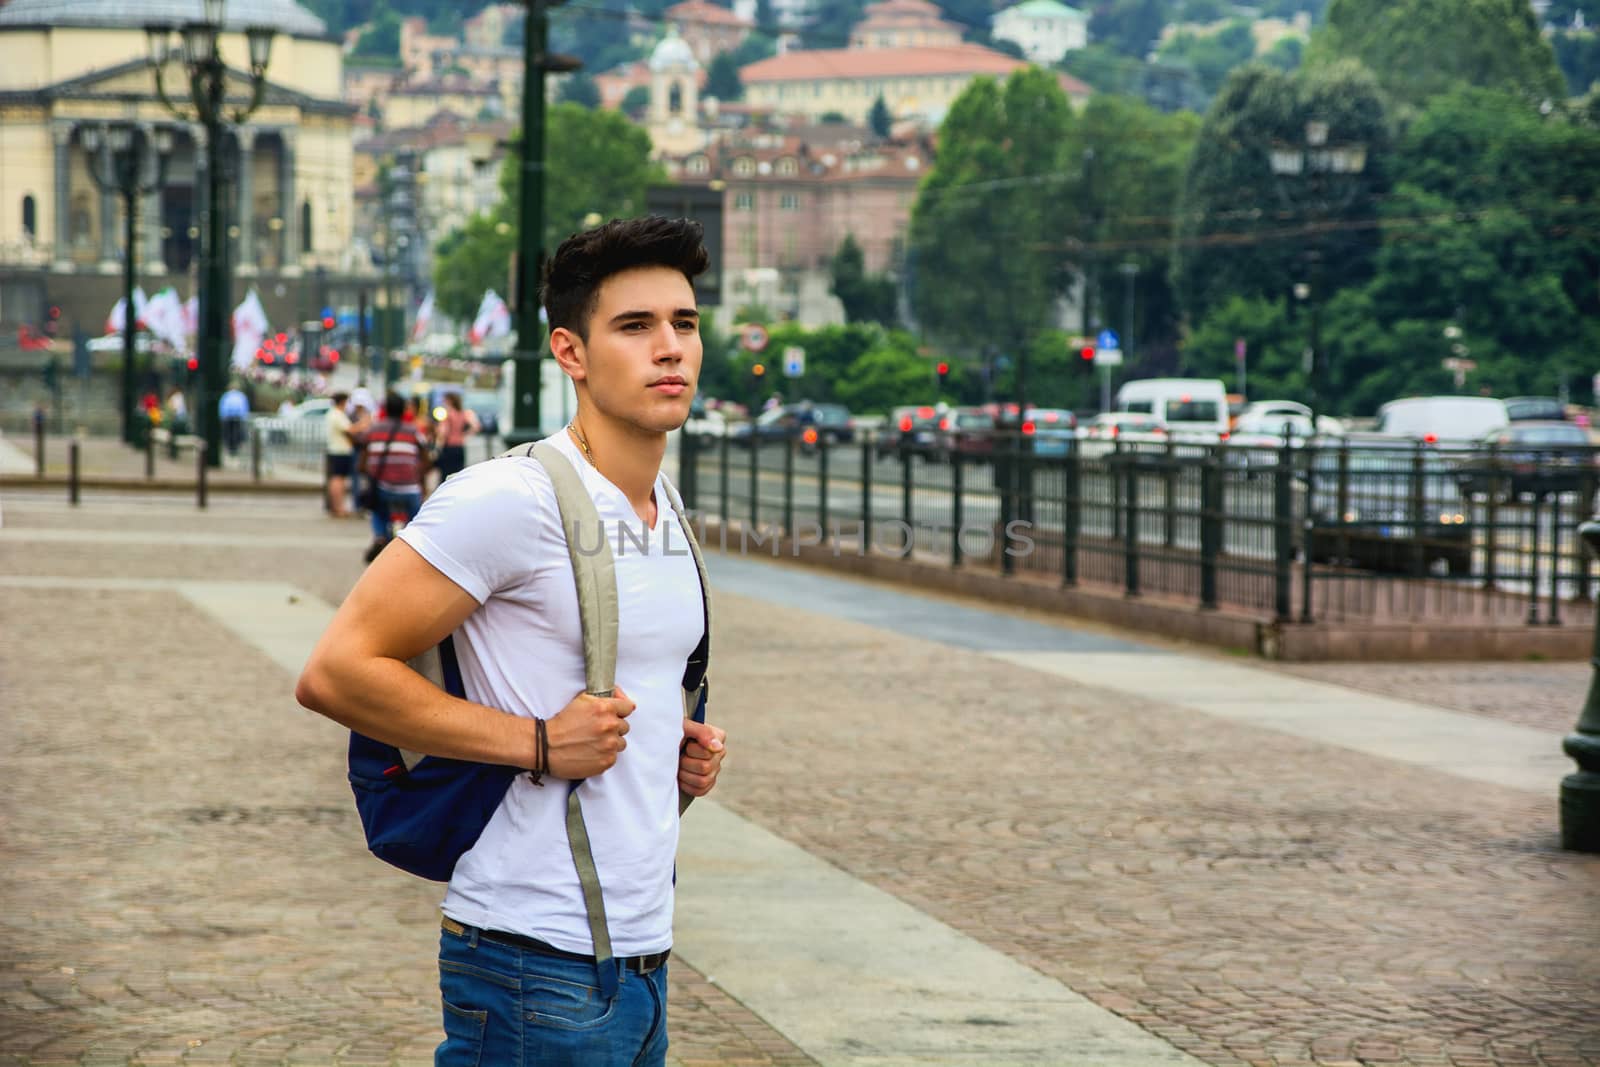 Handsome young man walking in European city square by artofphoto